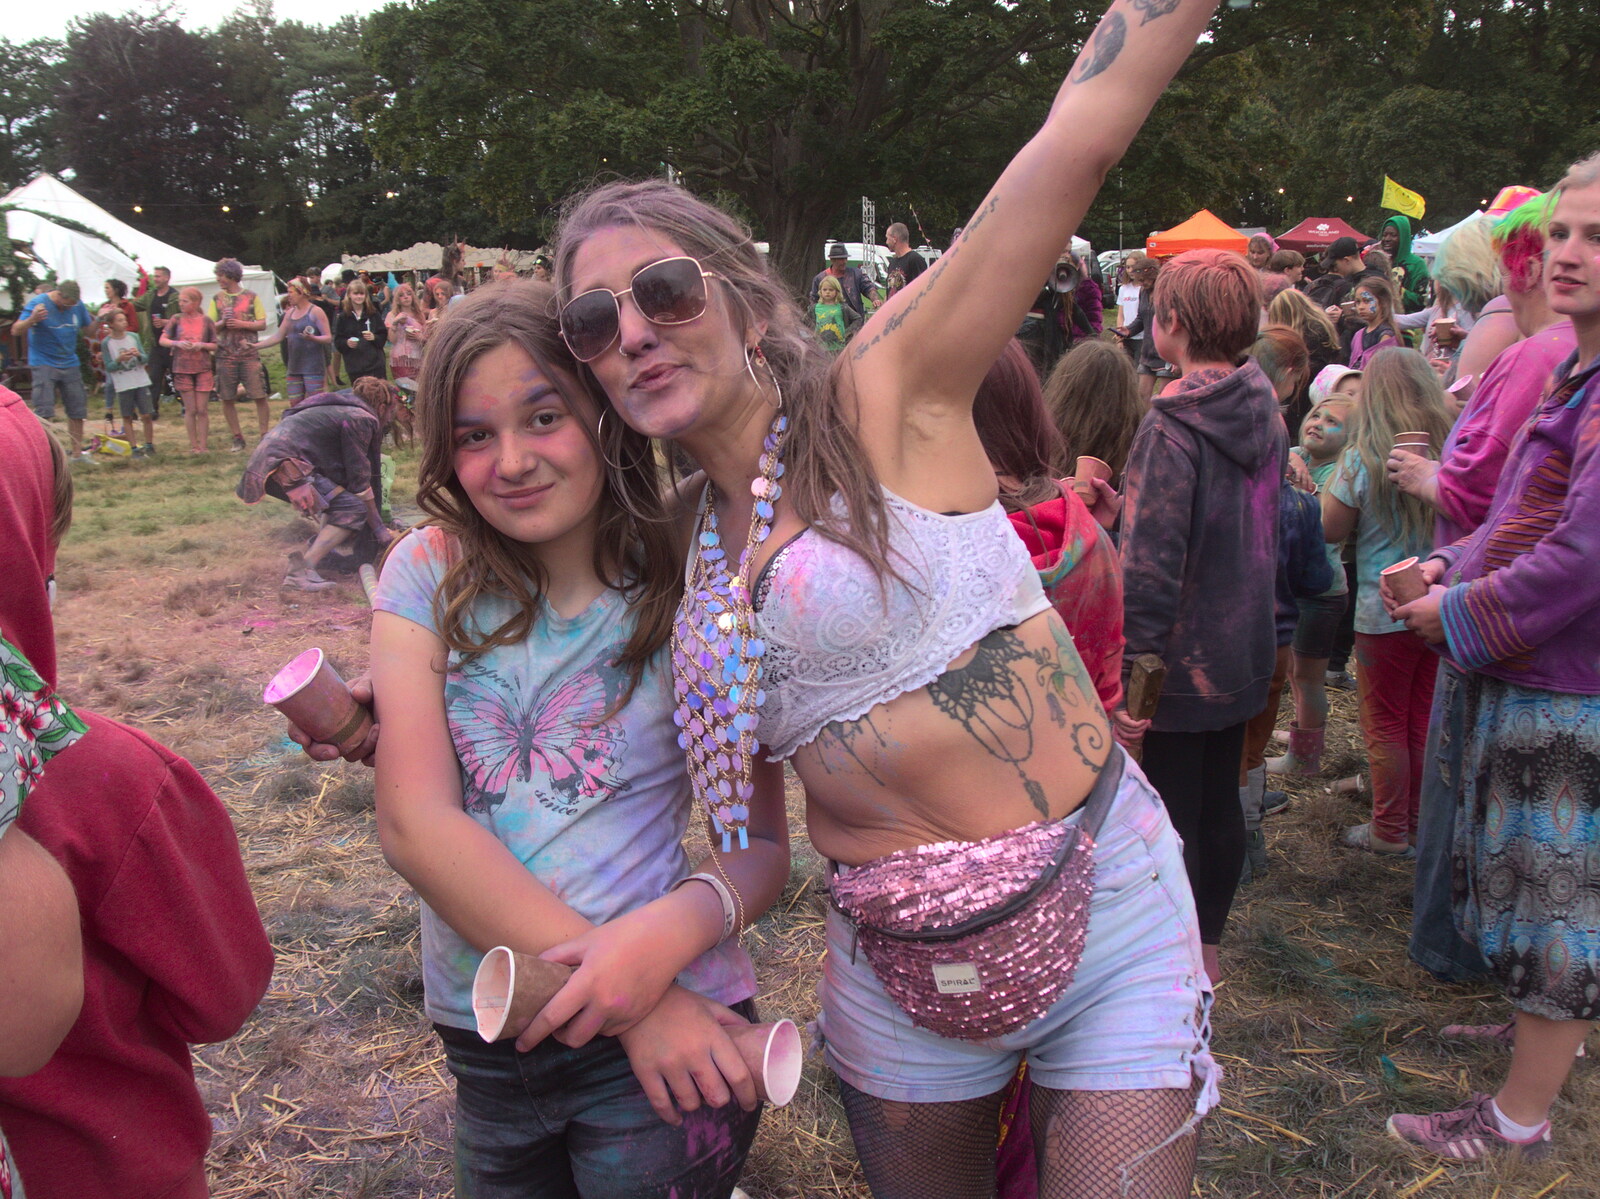 Some crazy paint fighters from Maui Waui Festival, Hill Farm, Gressenhall, Norfolk - 28th August 2021